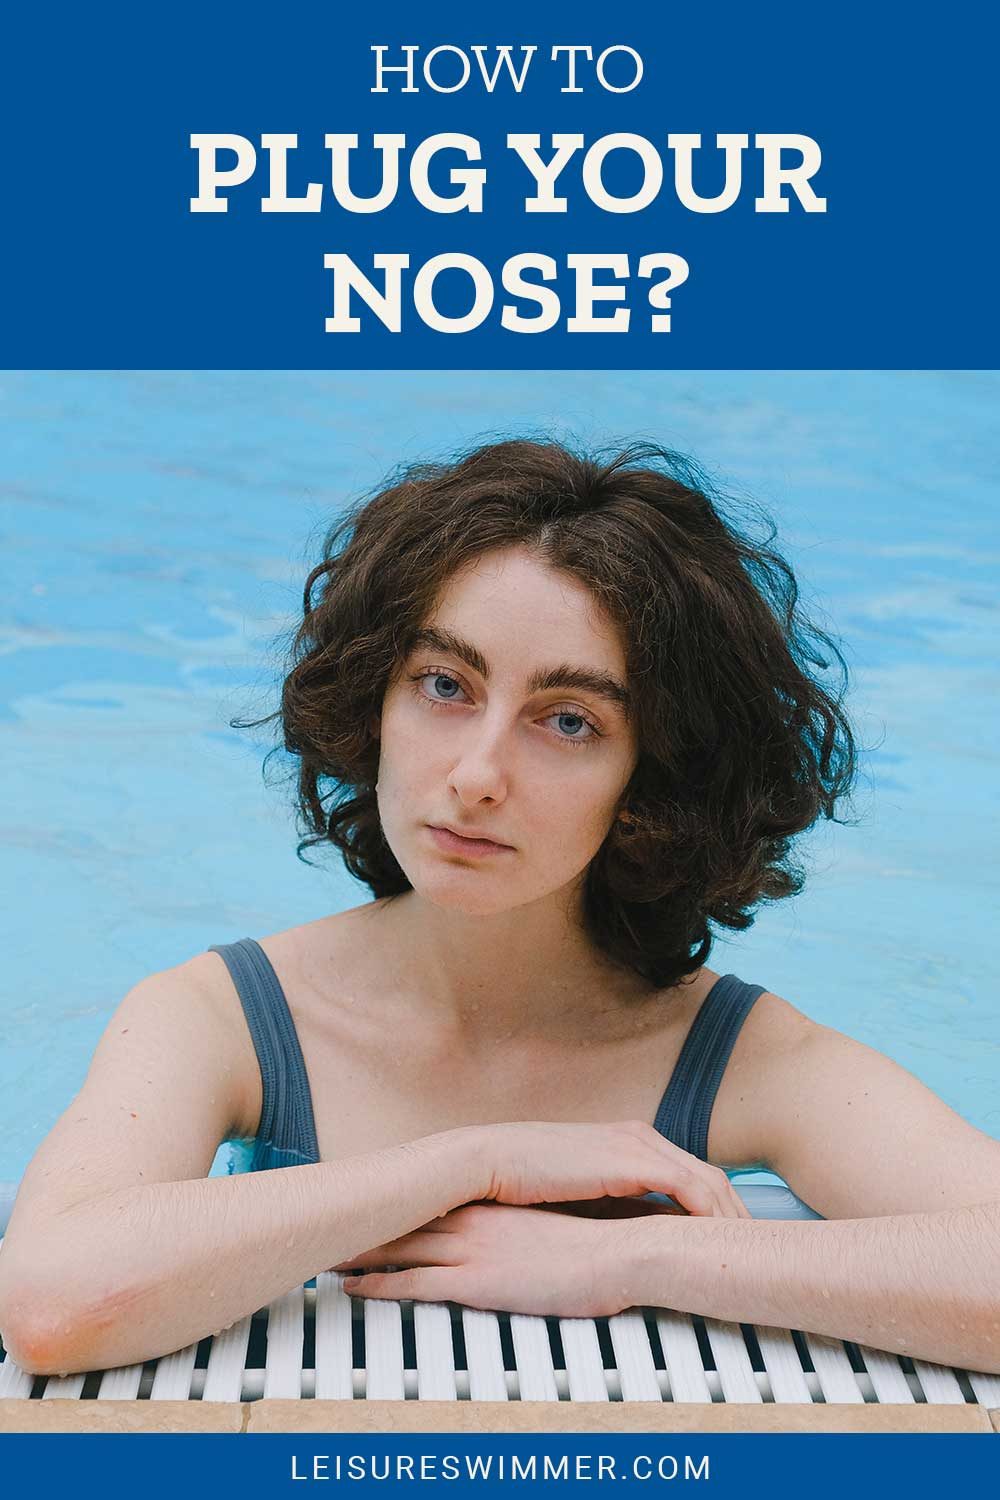 Girl in a swimming pool - How To Plug Your Nose?